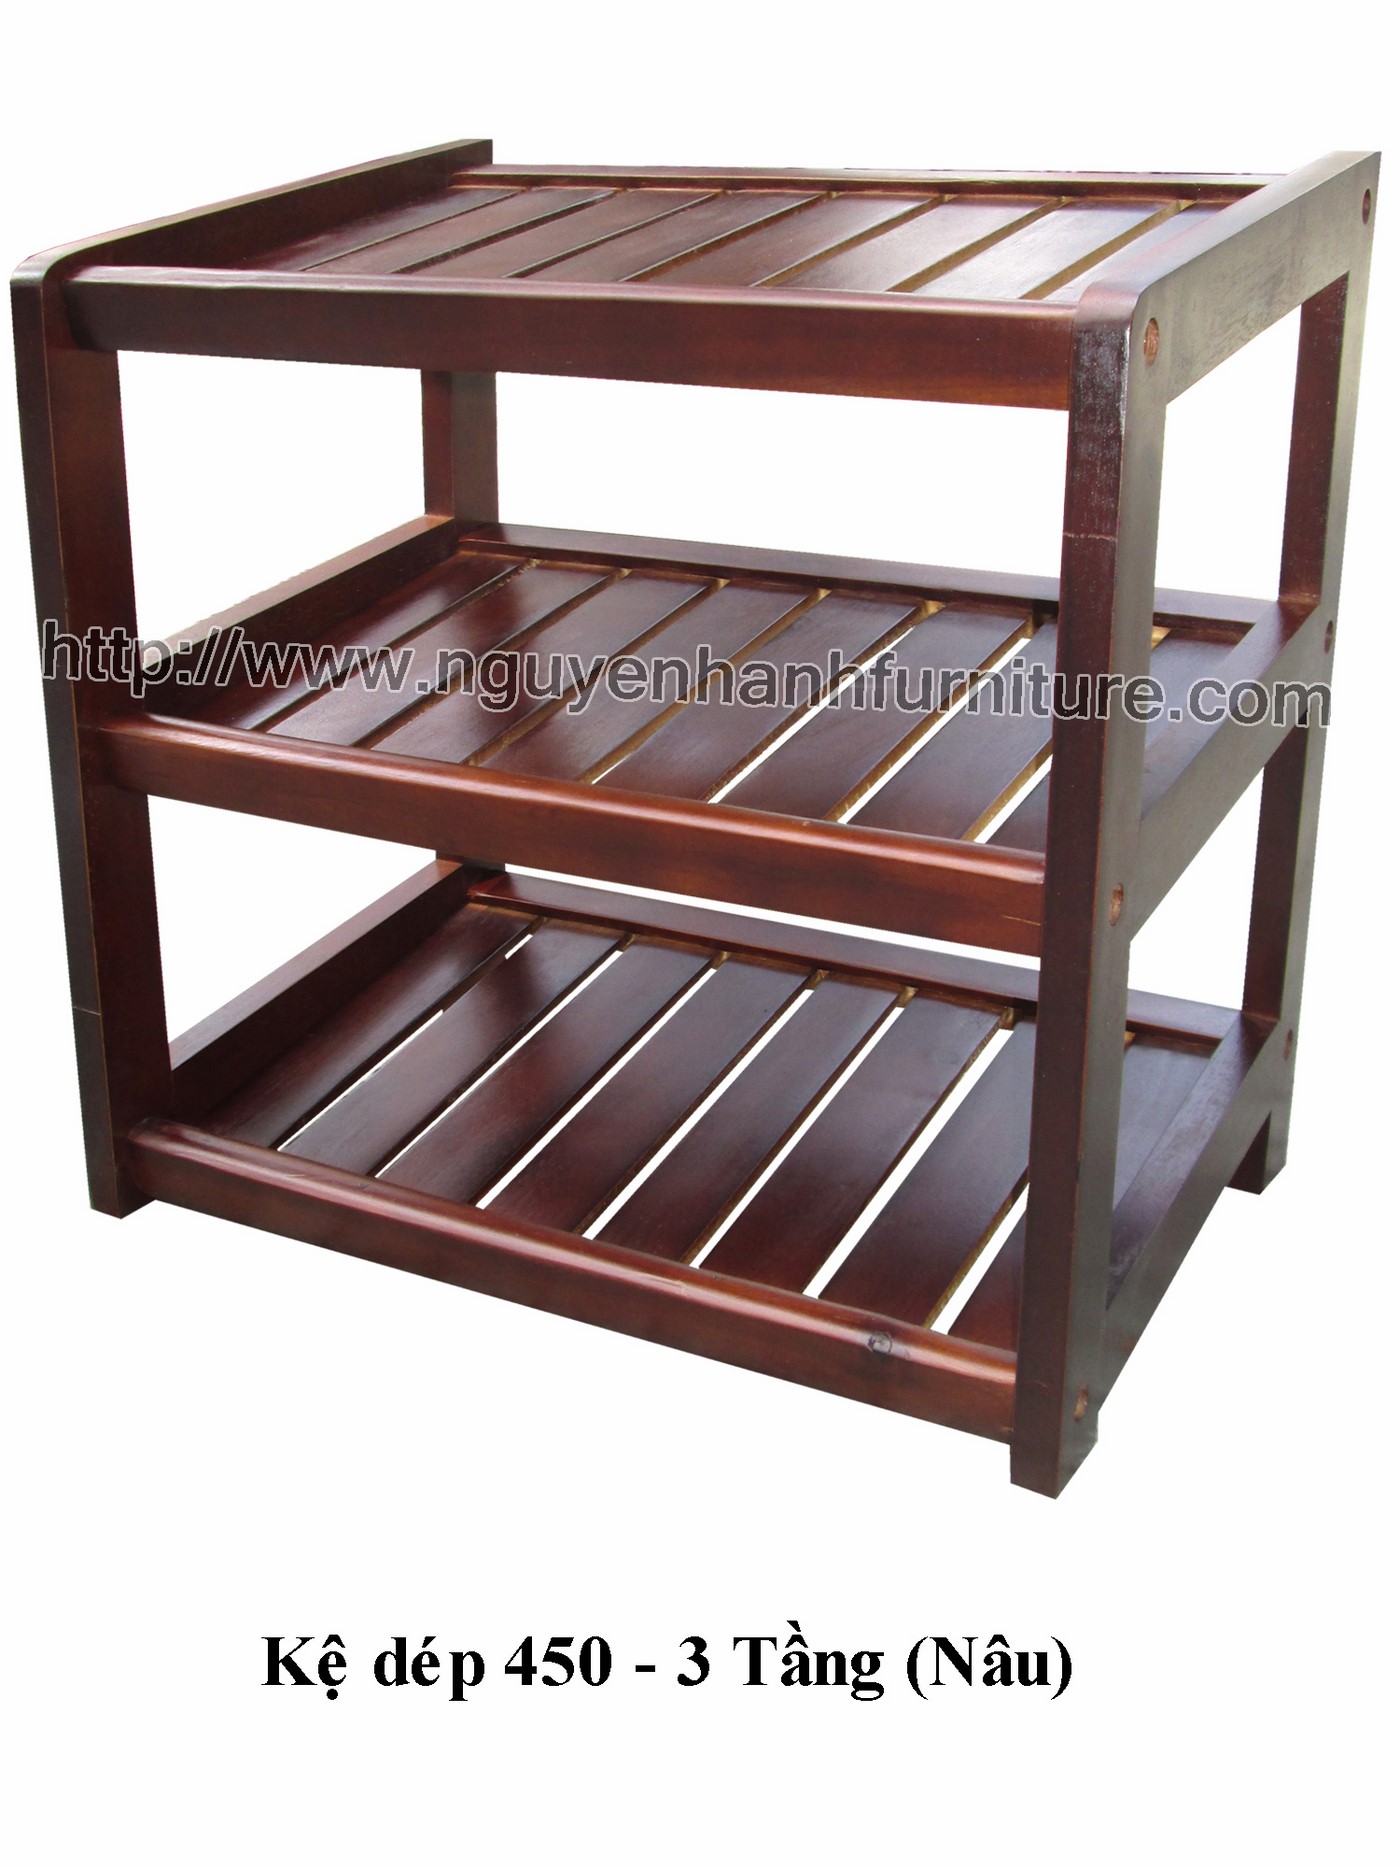 Name product: Shoeshelf 3 Floors 45 with sparse blades (Brown) - Dimensions: 45 x 30 x 45 (H) - Description: Wood natural rubber